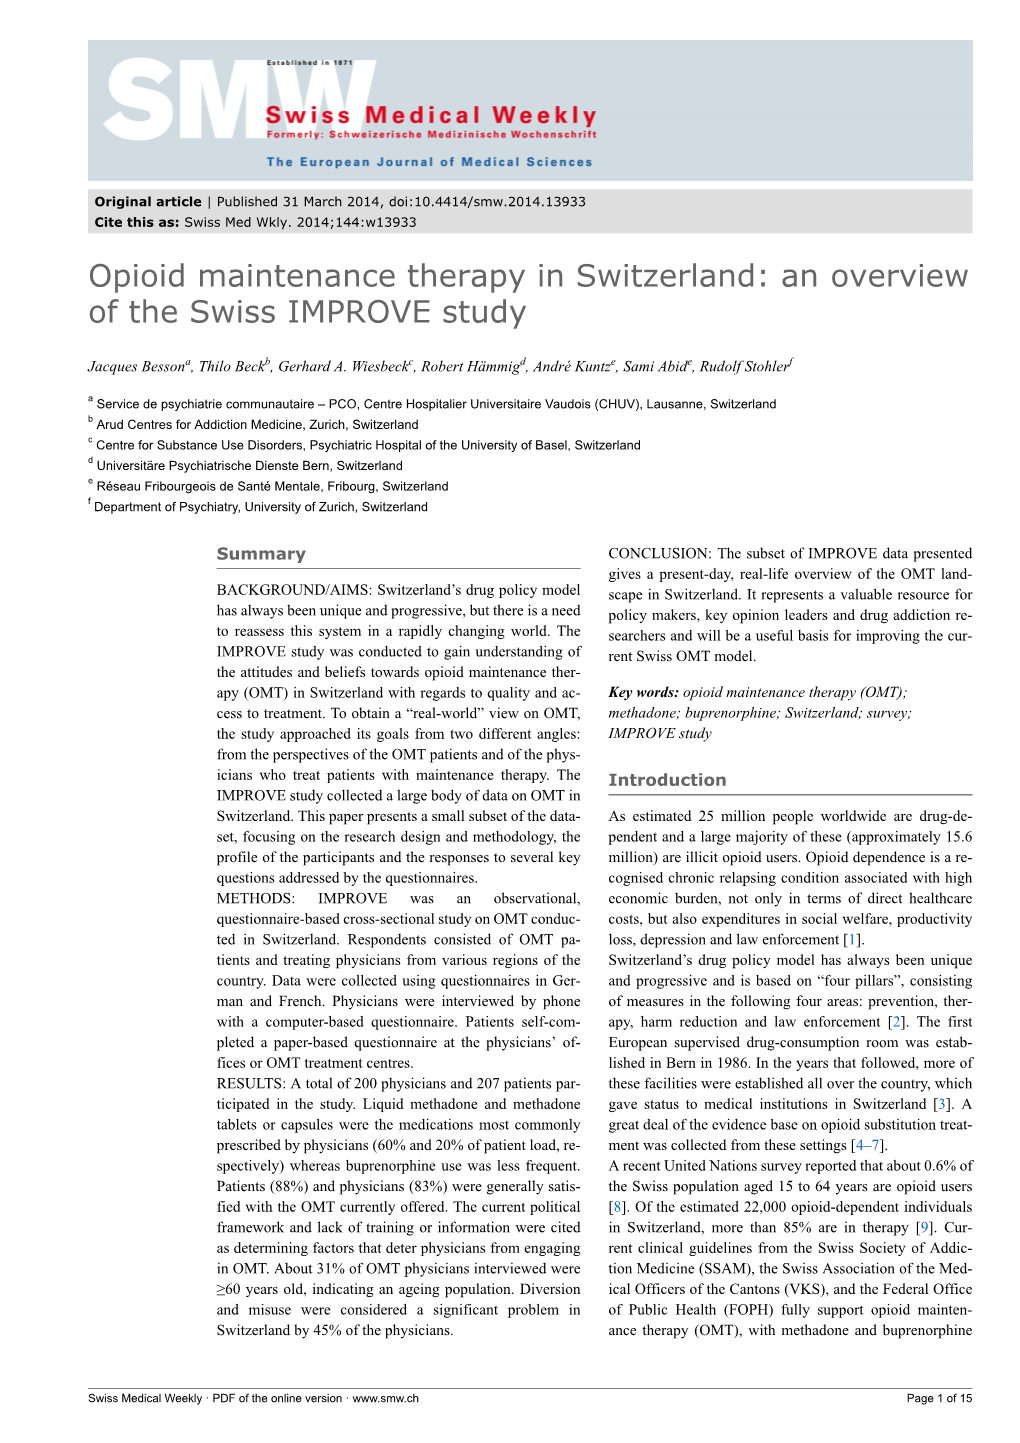 Opioid Maintenance Therapy in Switzerland: an Overview of the Swiss IMPROVE Study